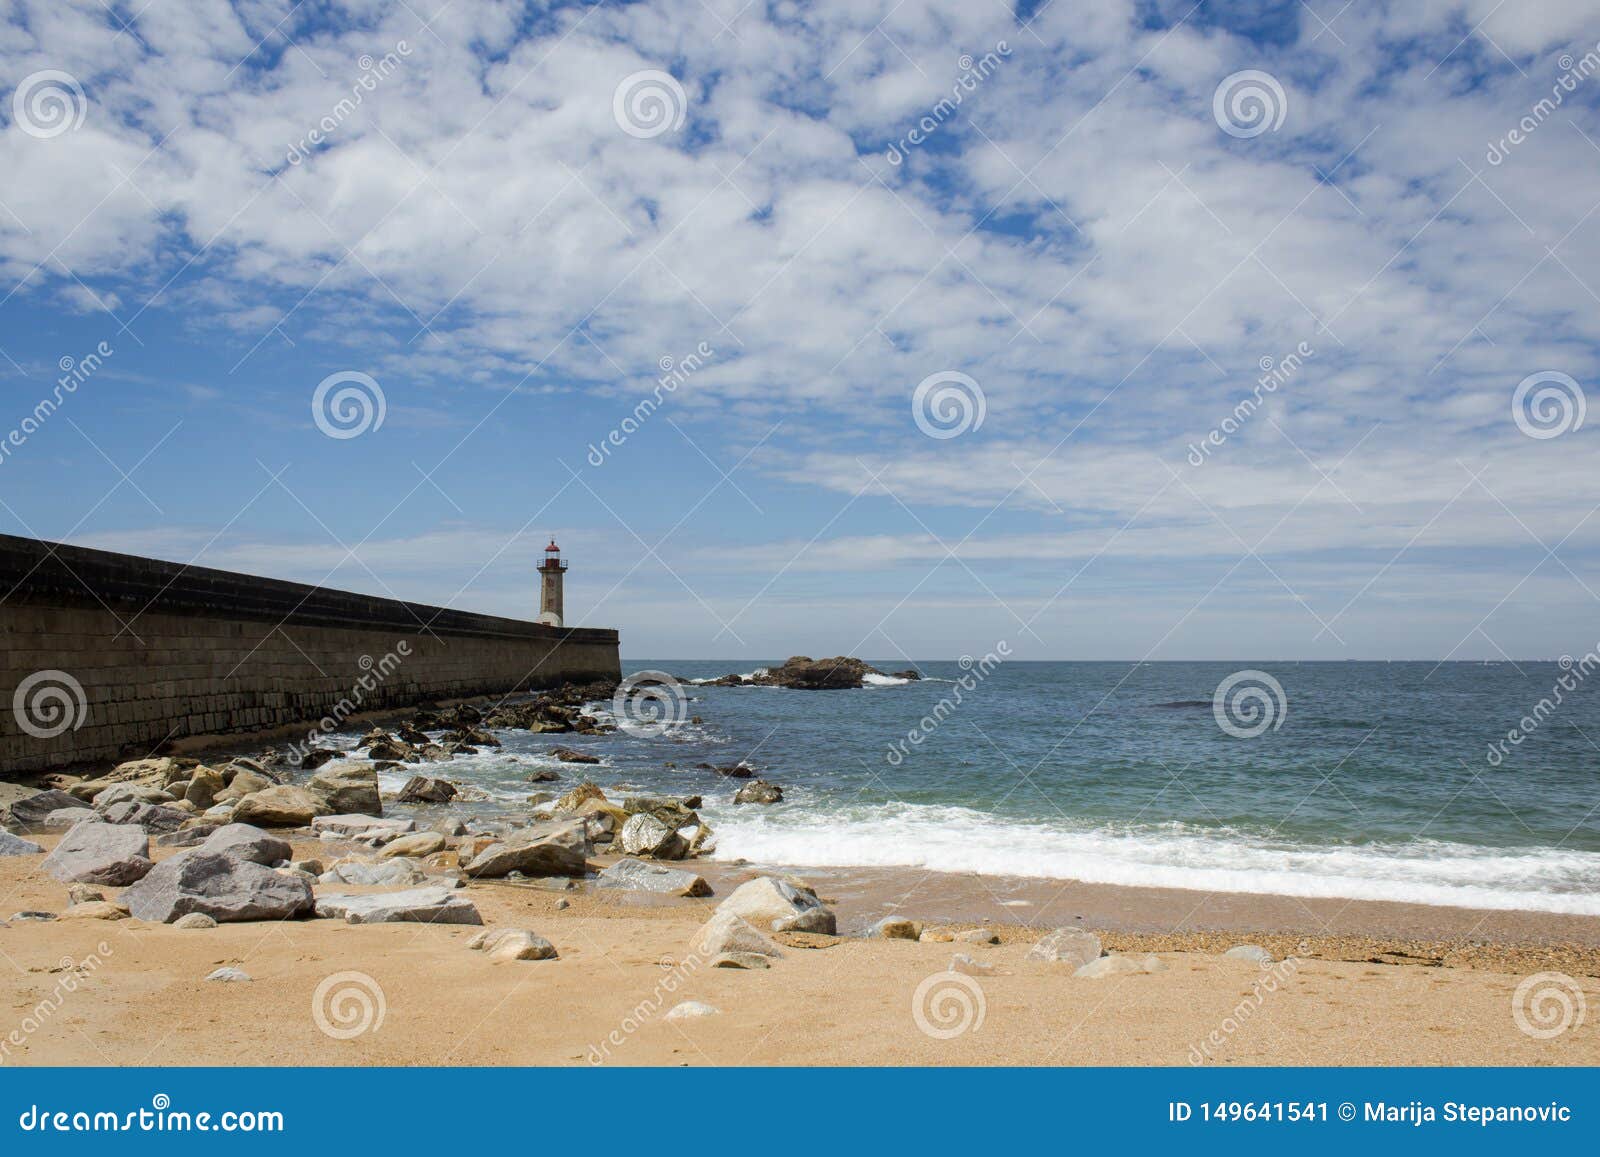 view from carneiro beach in porto to pier and lighthouse felgueiras